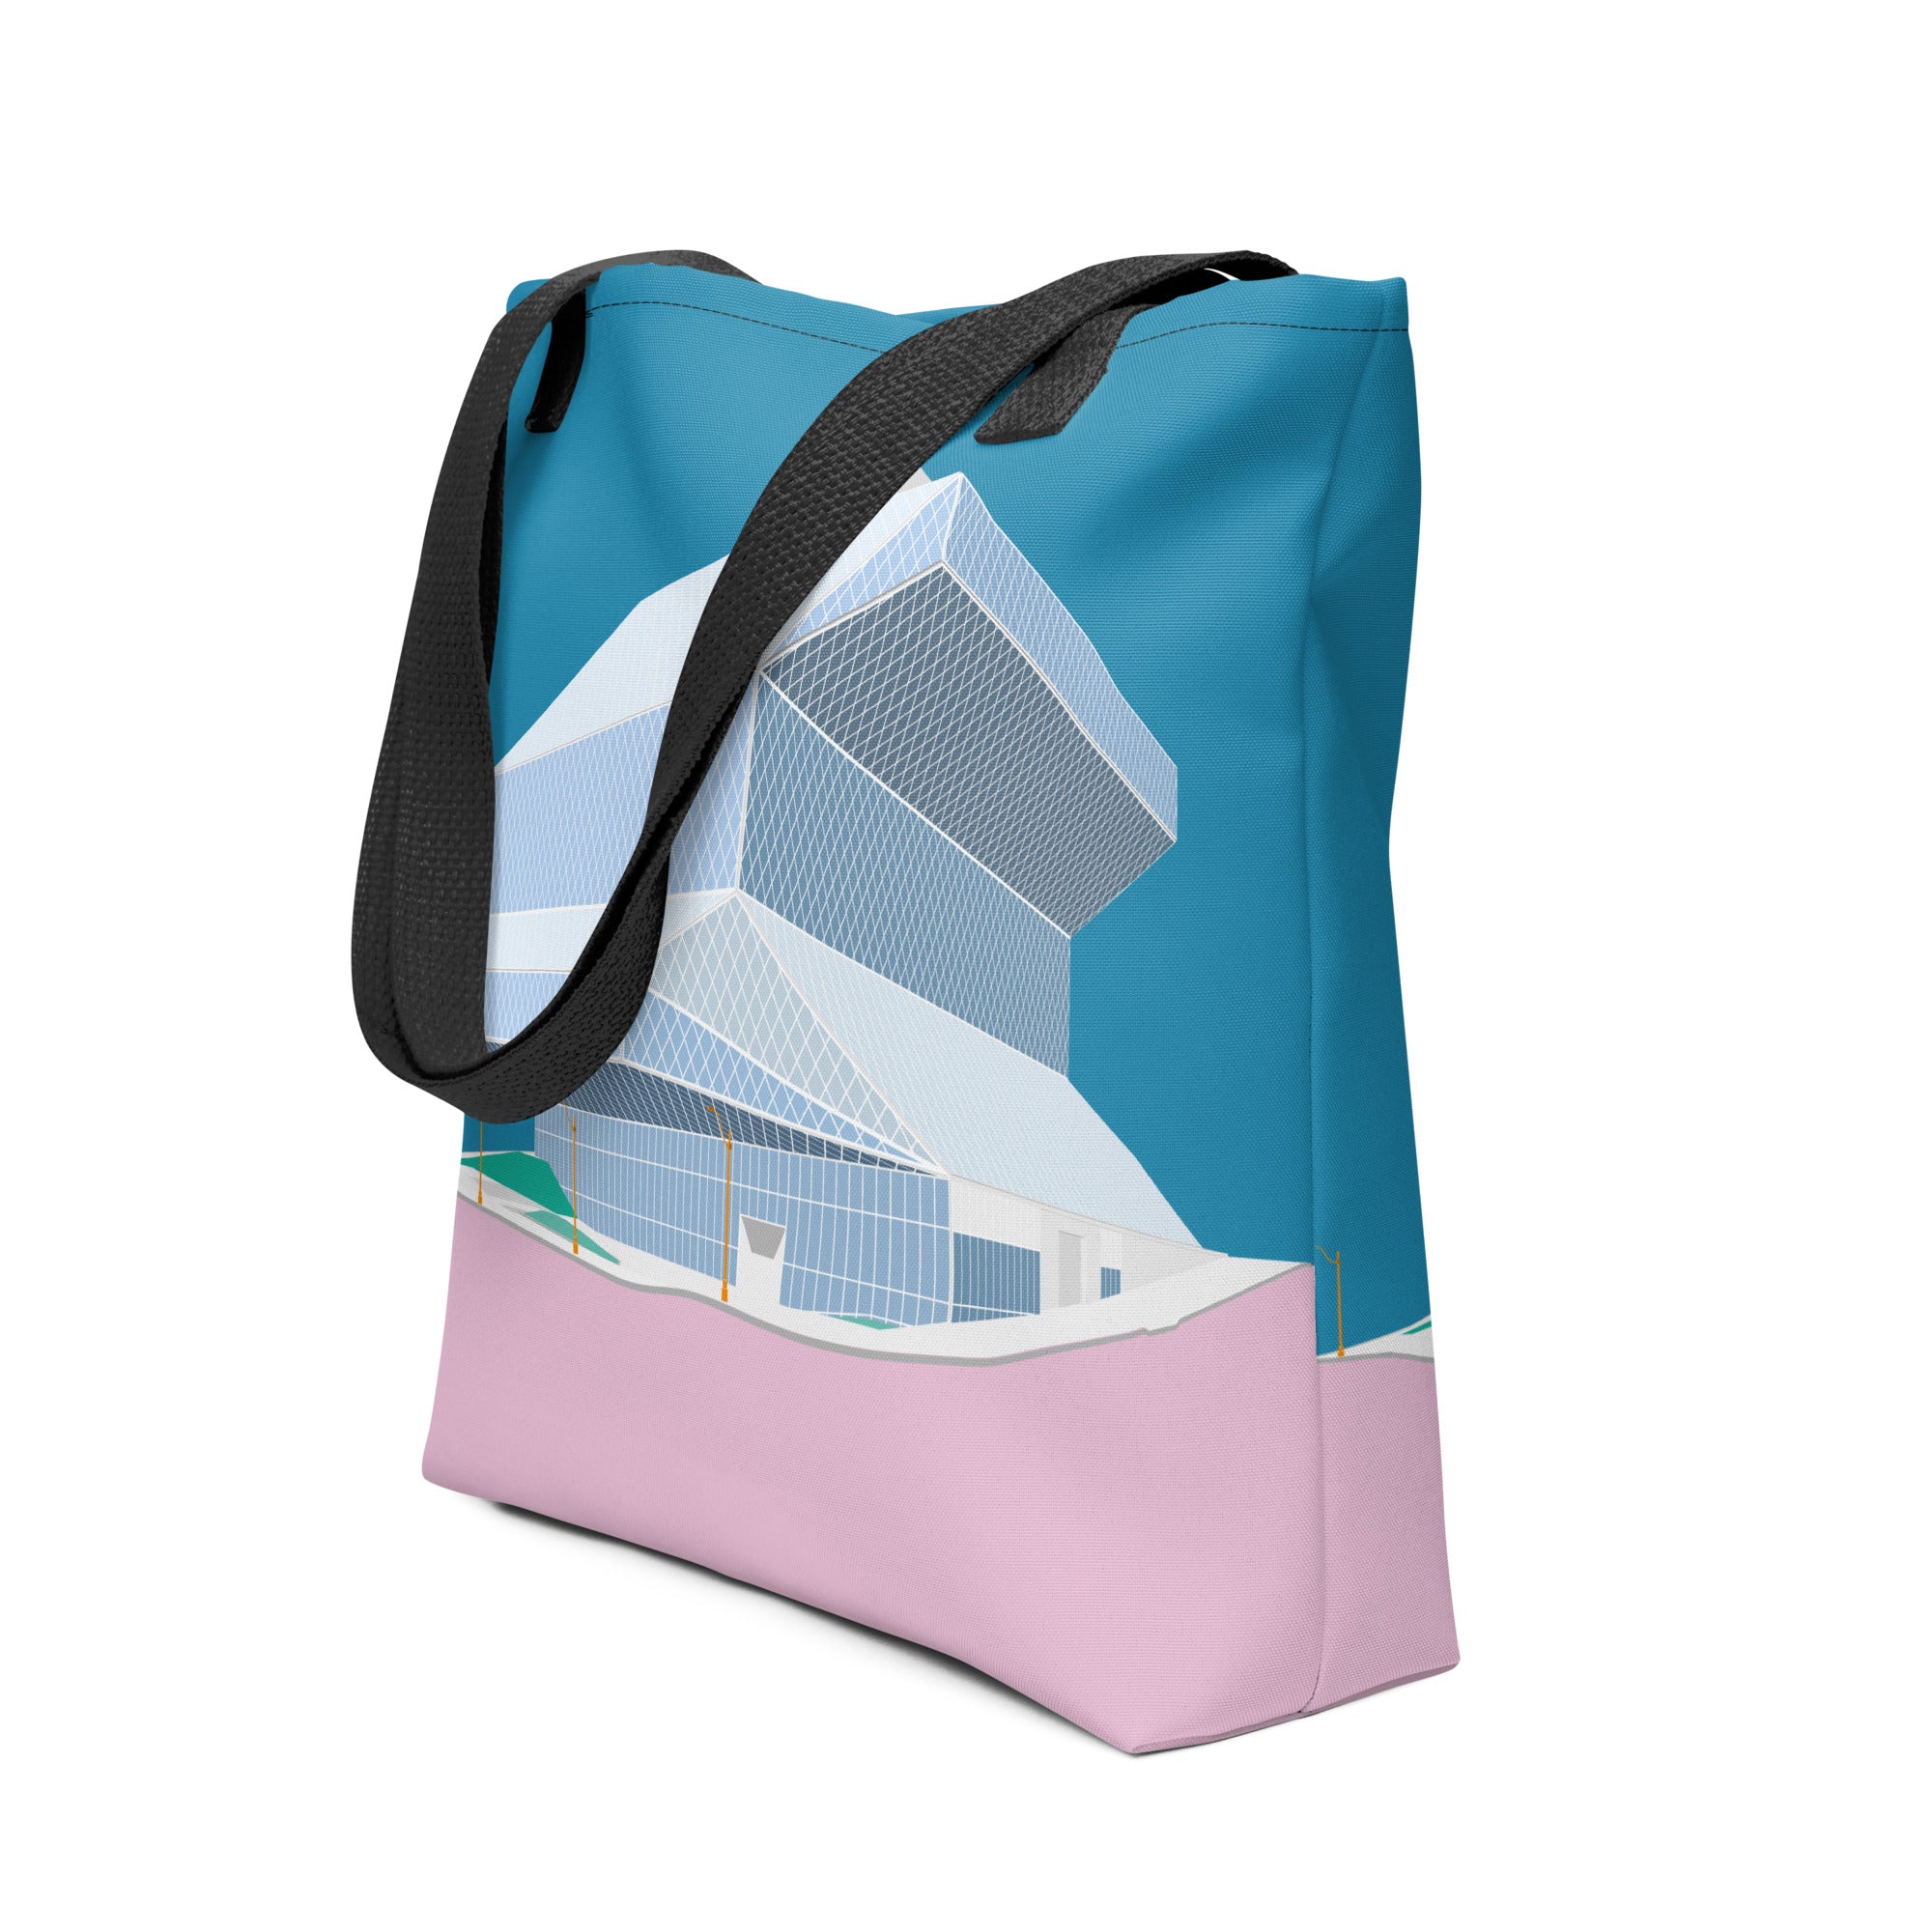 Seattle Central Library Tote Bags